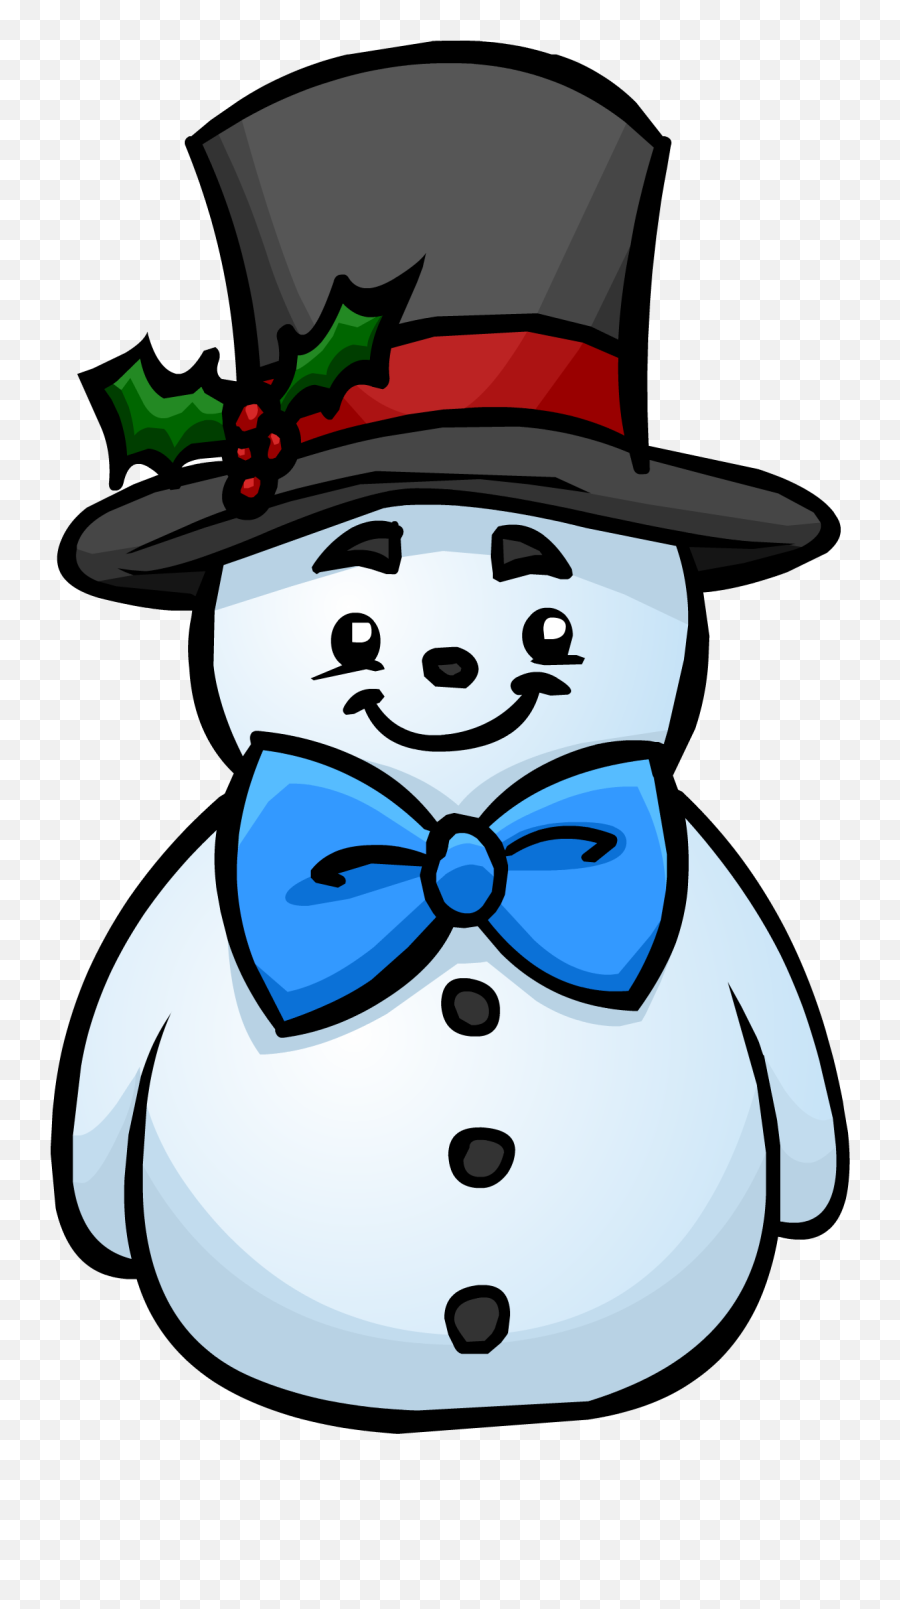 Download Top Hat Snowman - Top Hat For A Snowman Png Image Snowman With A Top Hat Clipart Emoji,Tophat Png